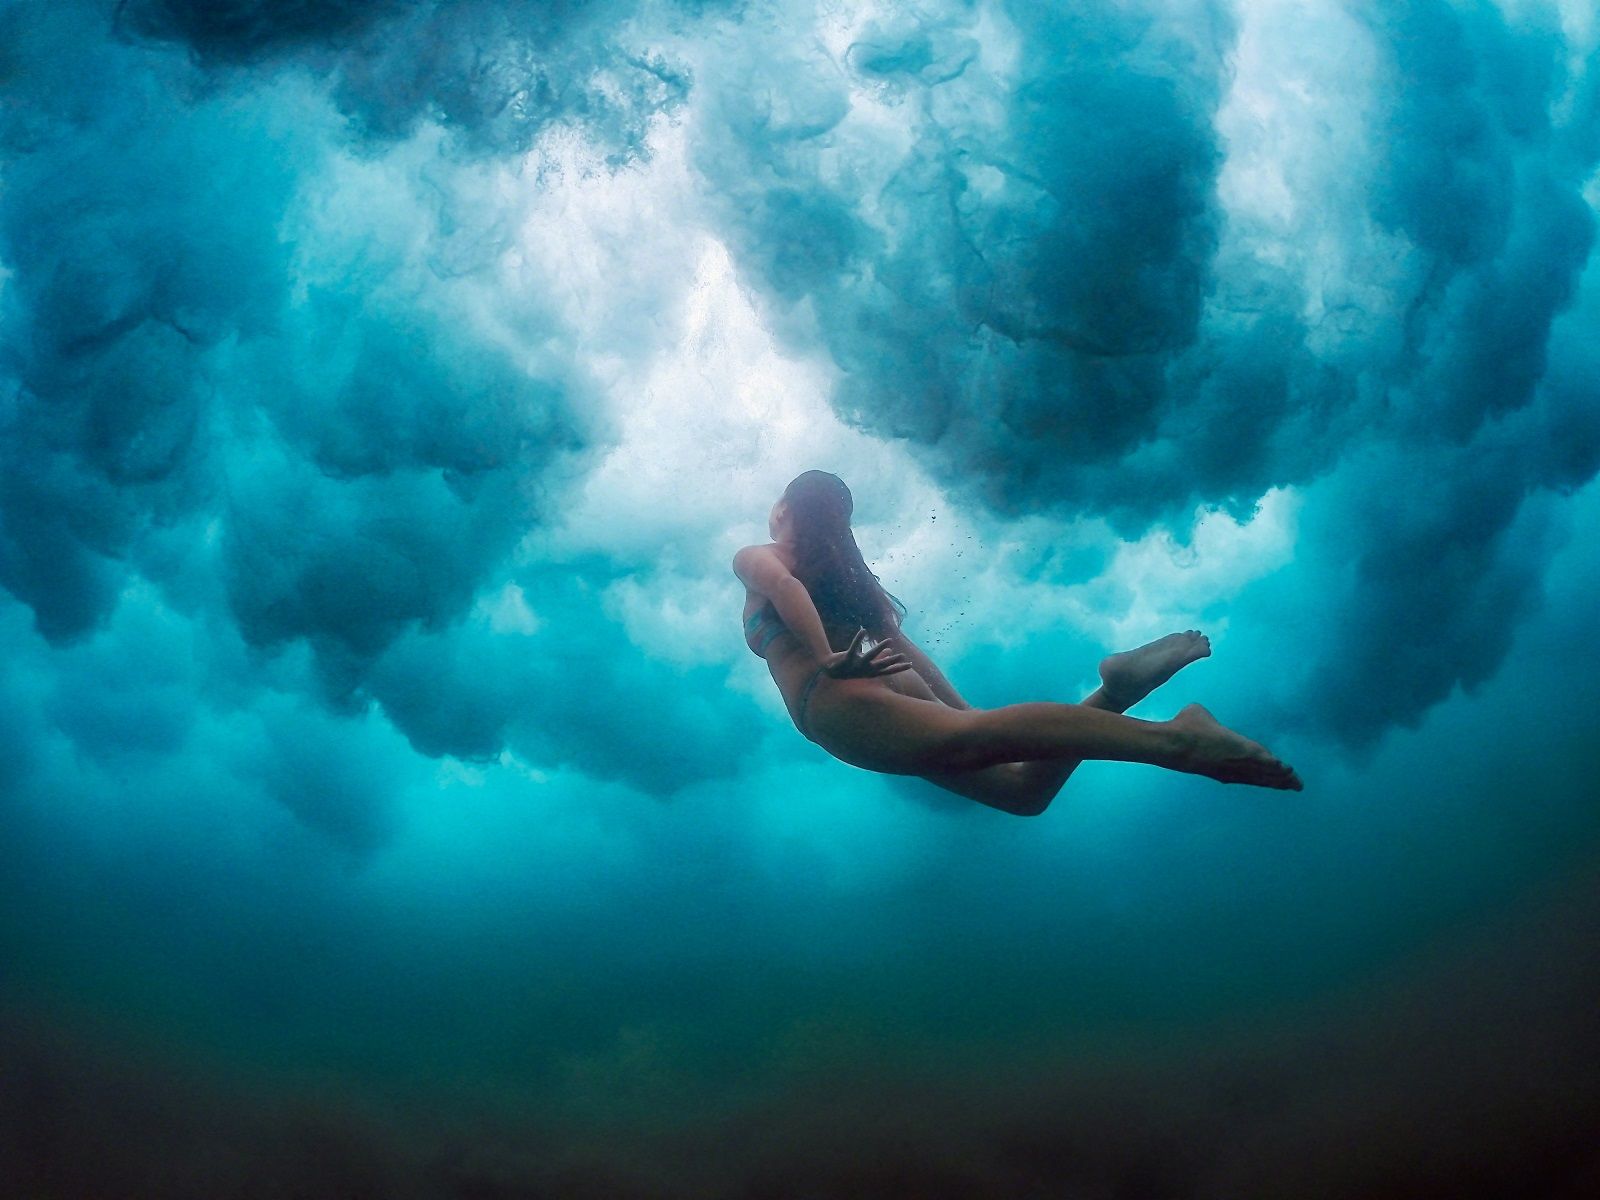 The Best Gopro Photos In The World Prepare To Lose Your Breath image 5